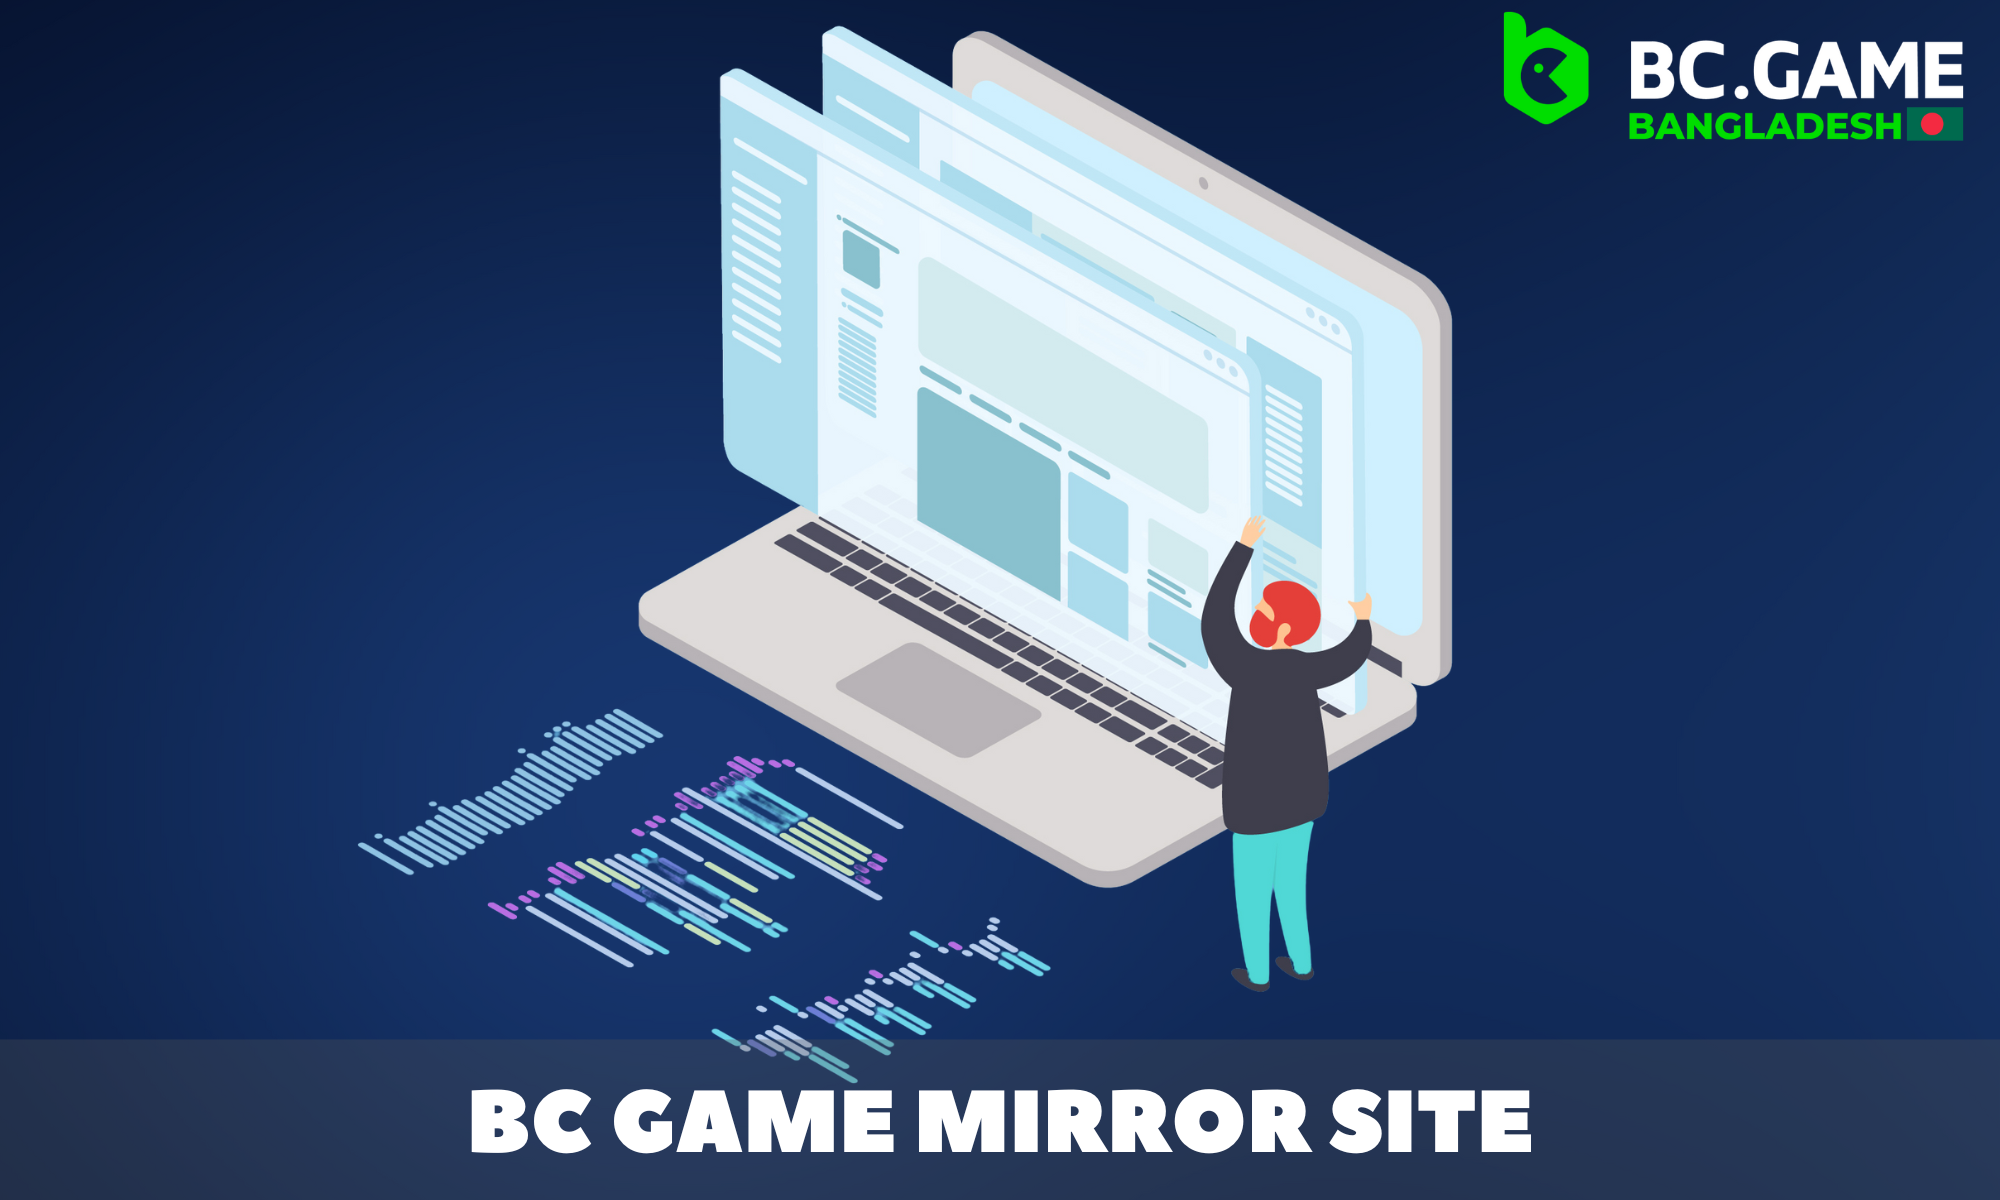 BC Game has a special website mirror to improve access to the casino